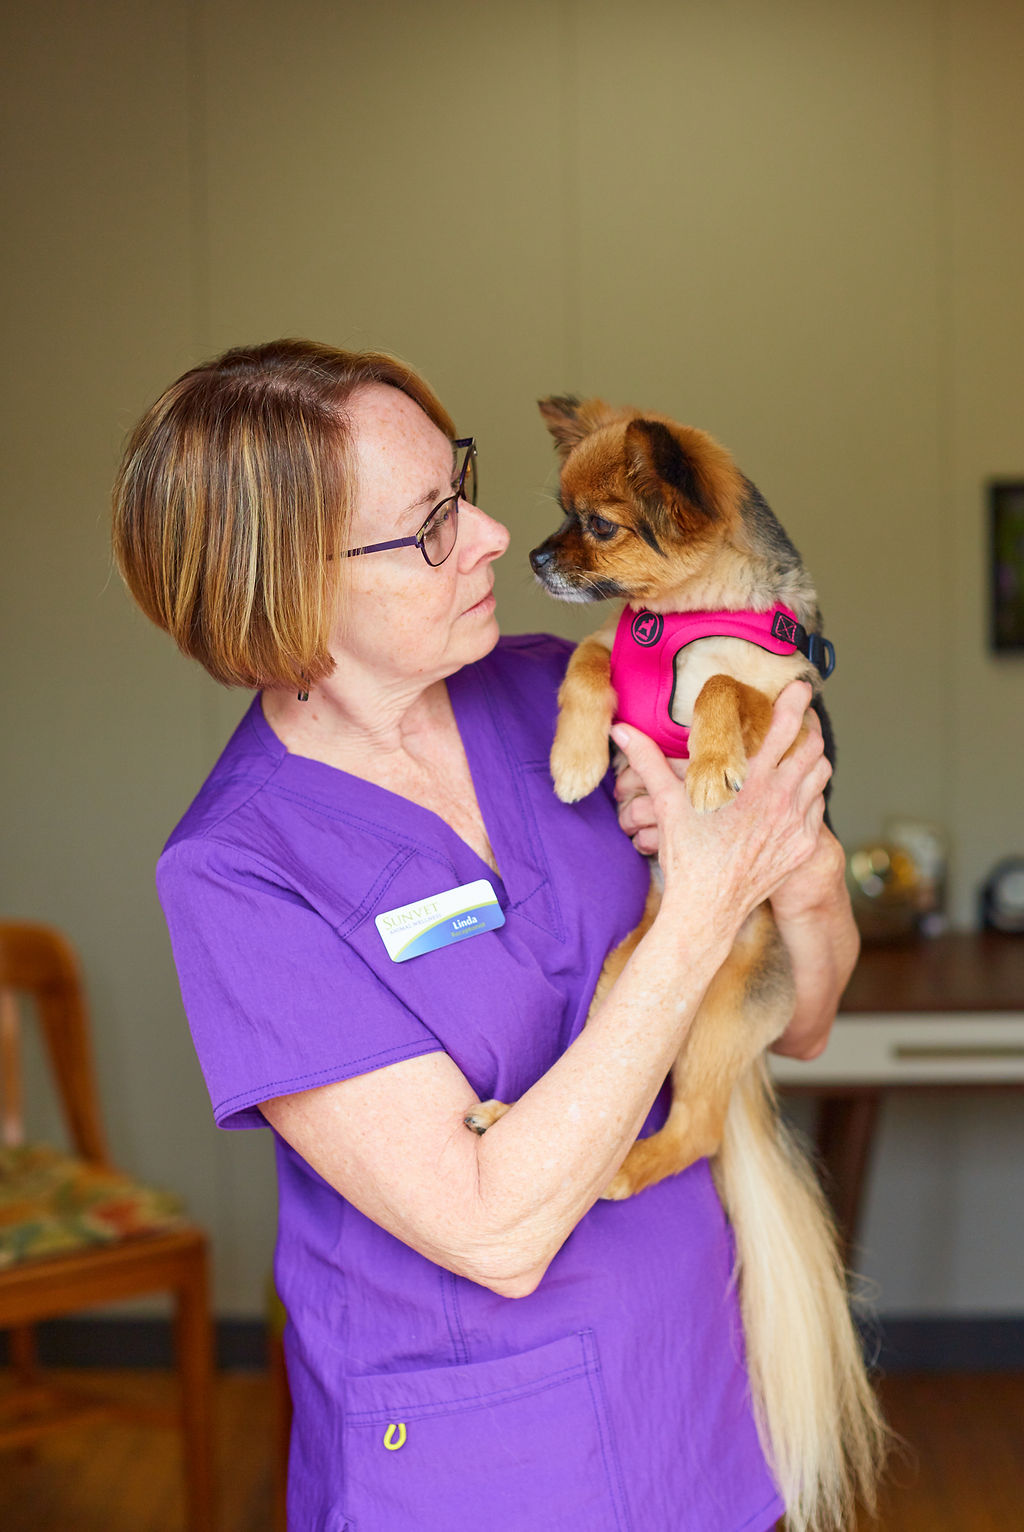 Meet the Sunvet Staff: An Interview With Linda Woodmansee 1